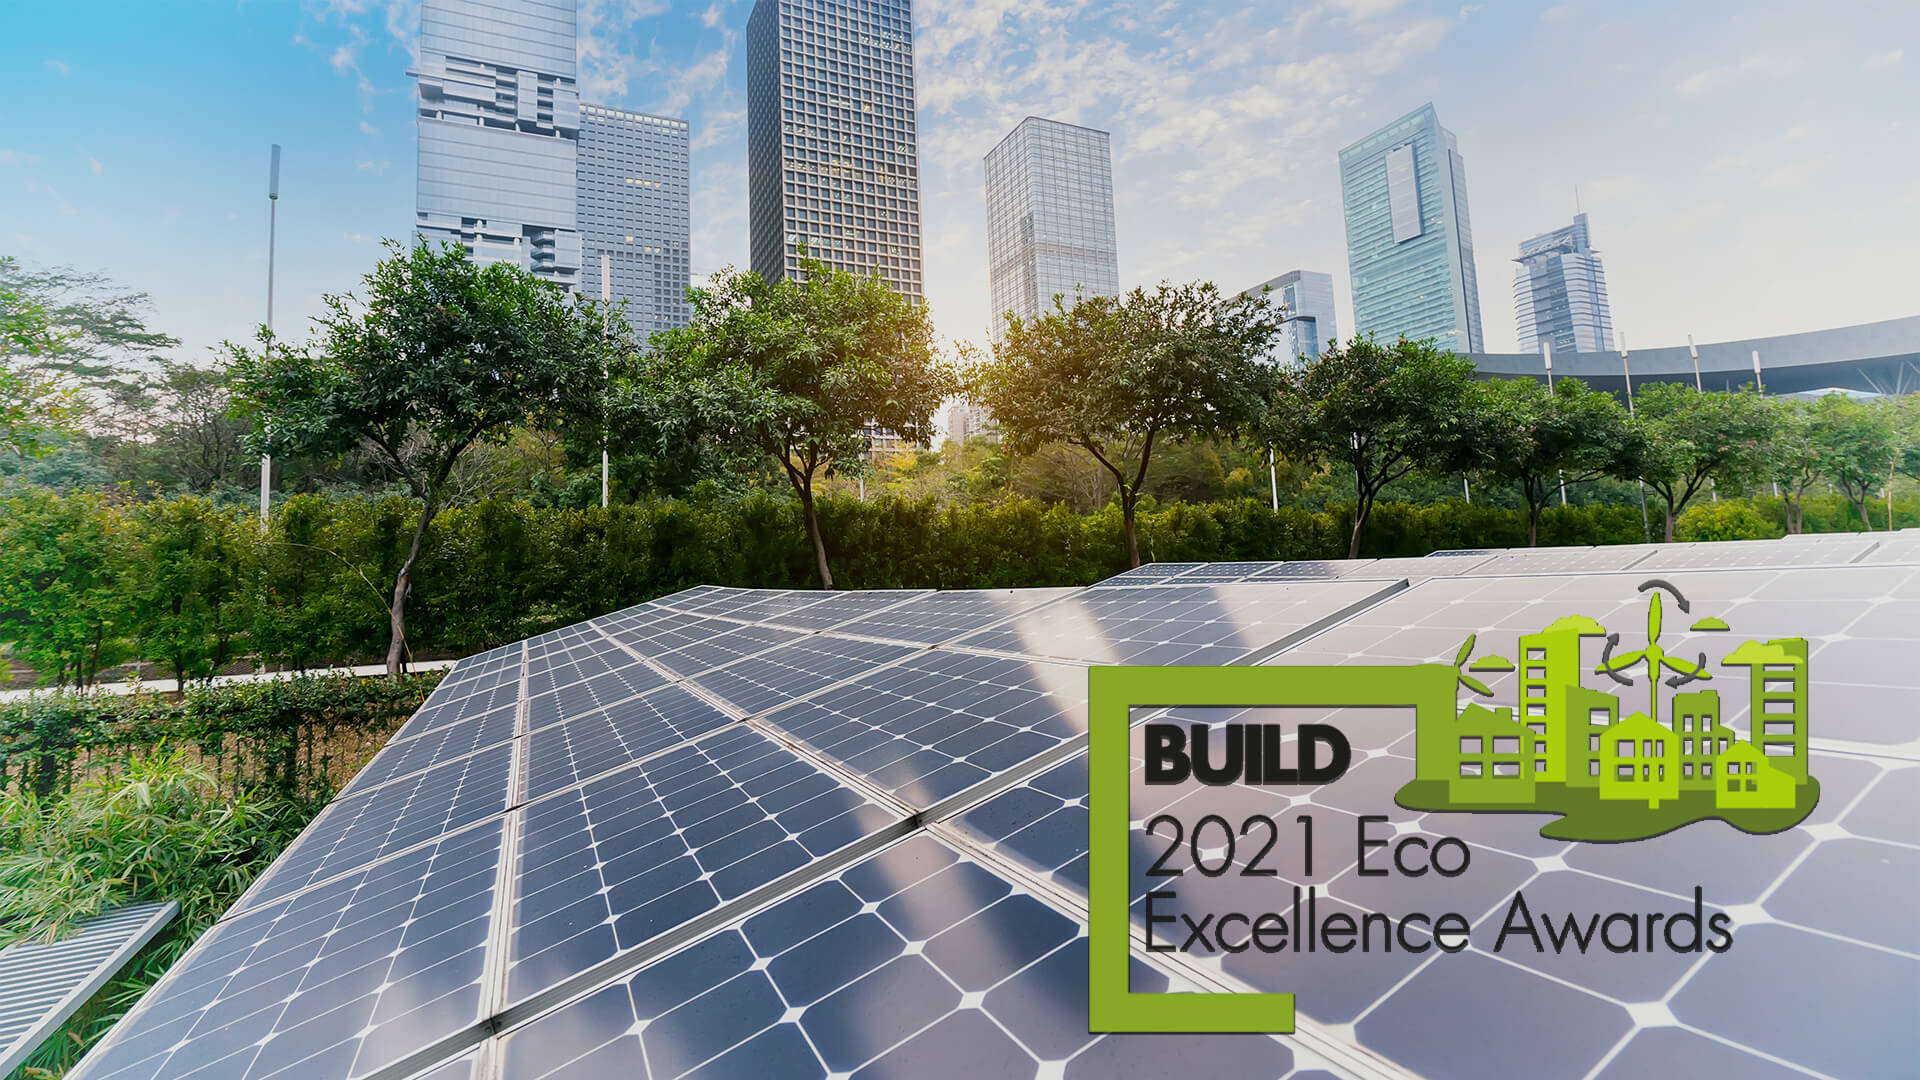 Build Eco Excellence Awards 2021 logo with a city skyline in the background, and solar panels